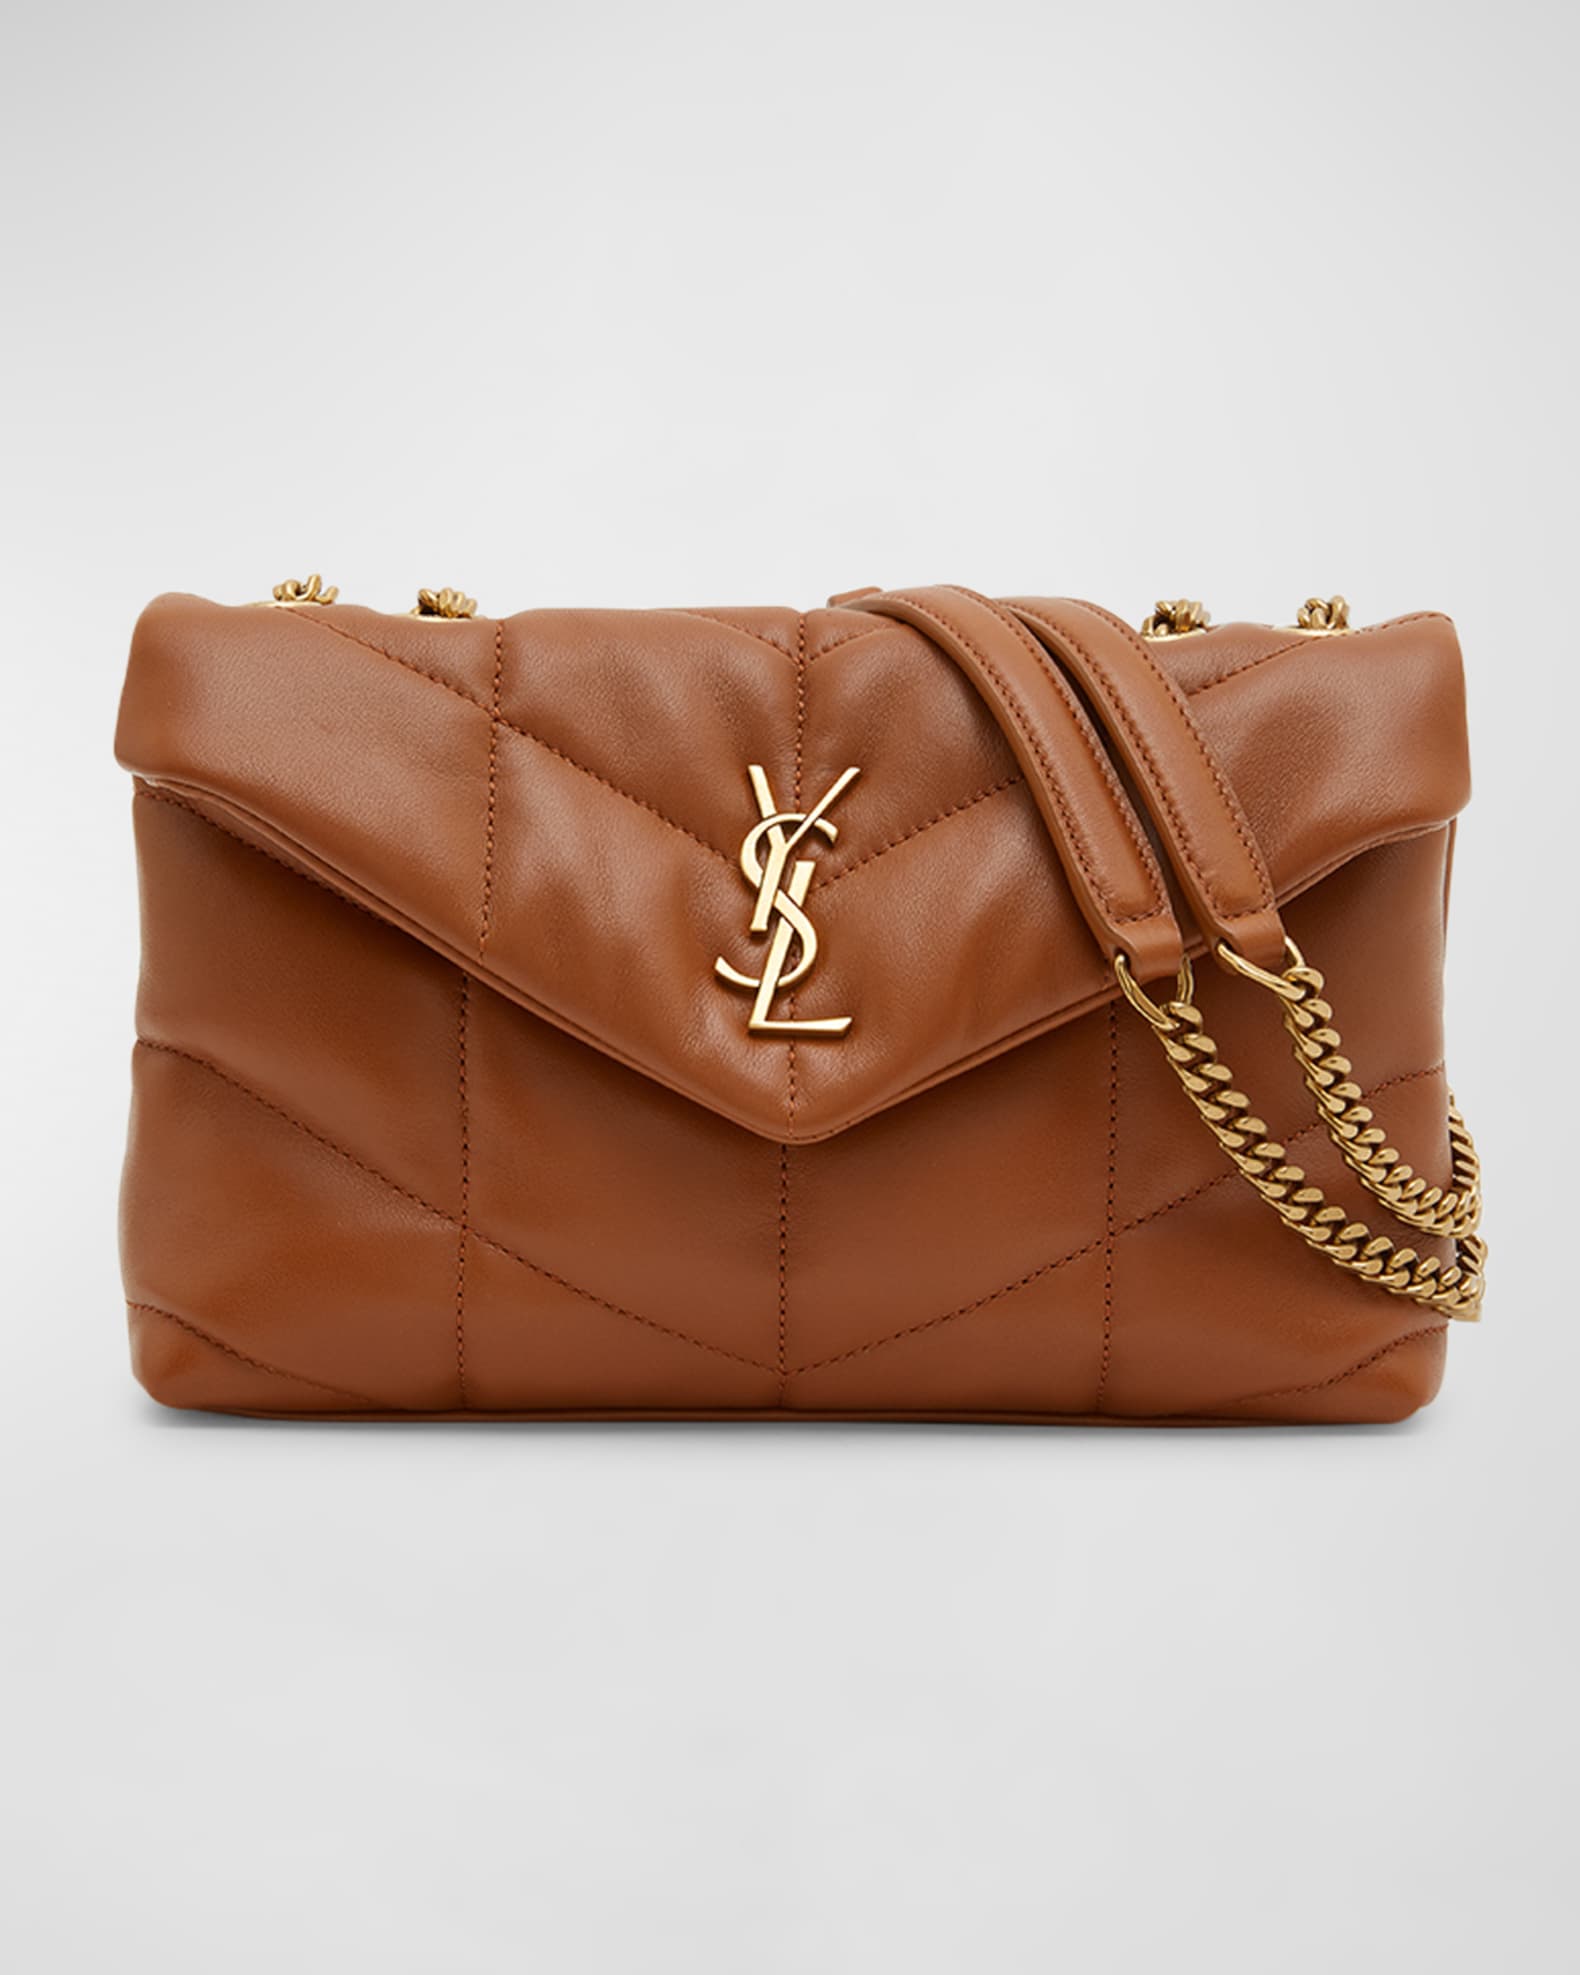 Saint Laurent Toy YSL Quilted Puffer Chain Shoulder Bag | Neiman Marcus